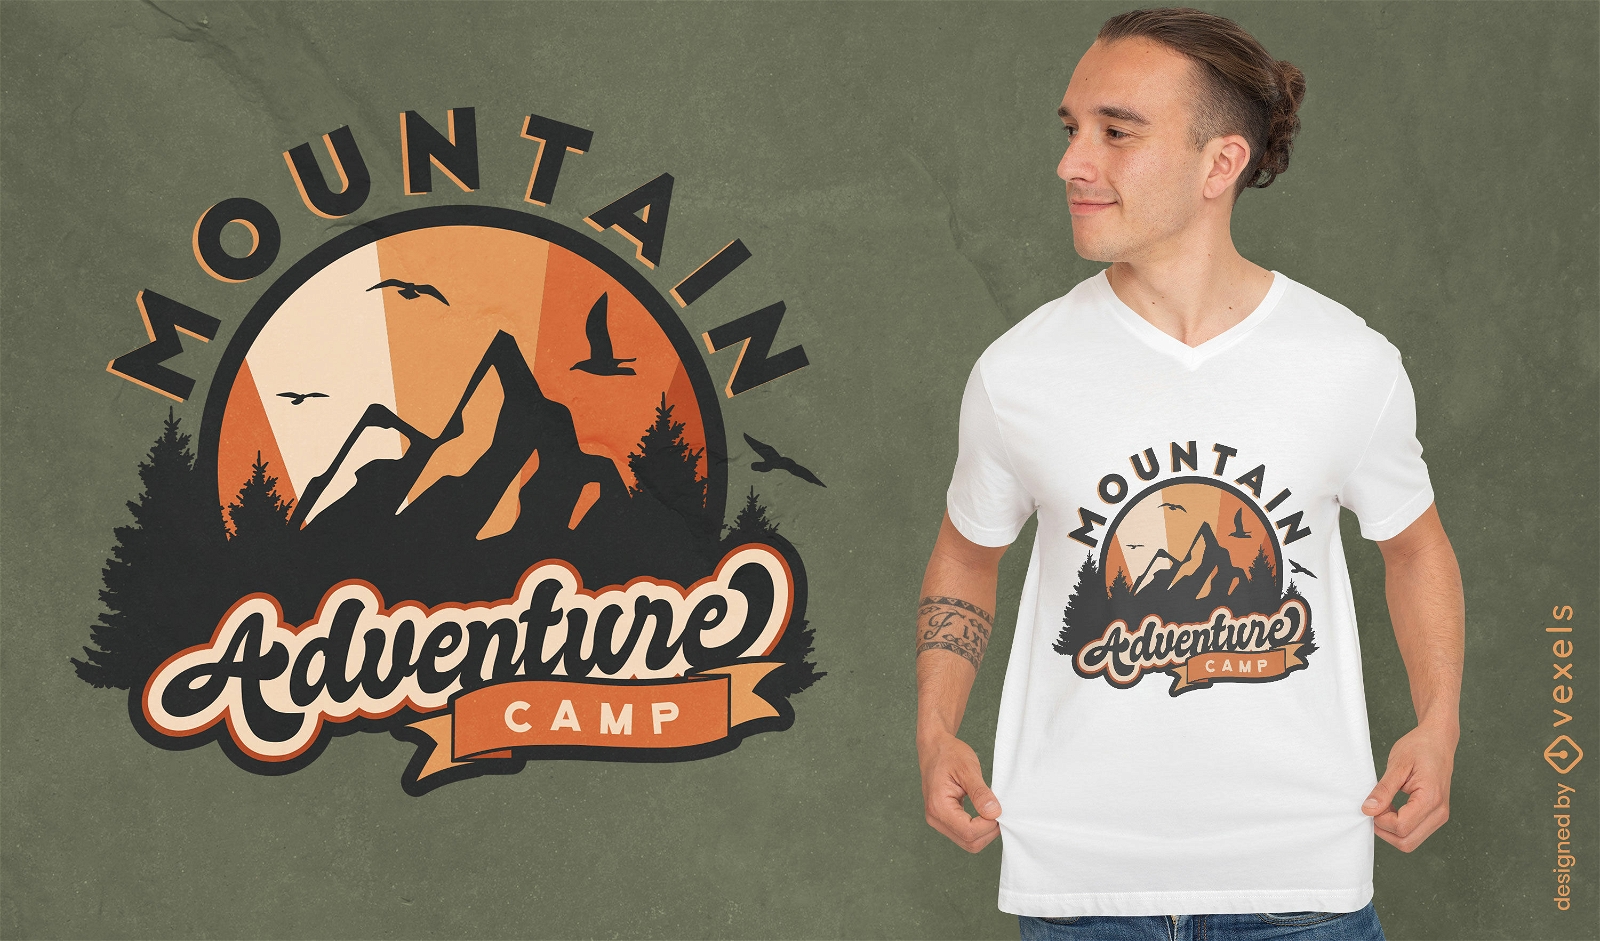 Camping in the mountains badge t-shirt design